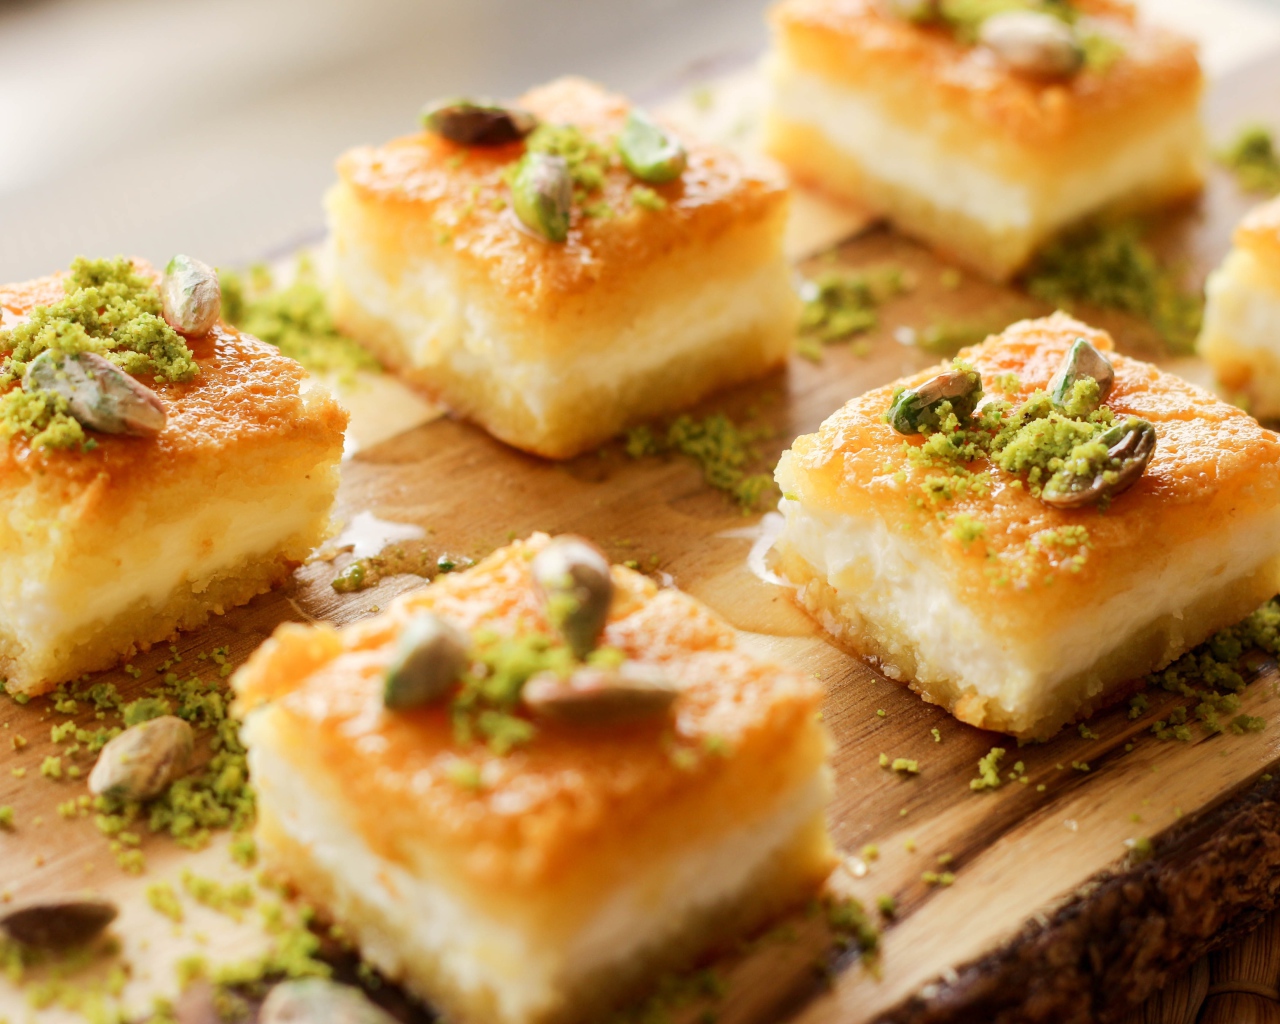 Delicious cake with cottage cheese and pistachios